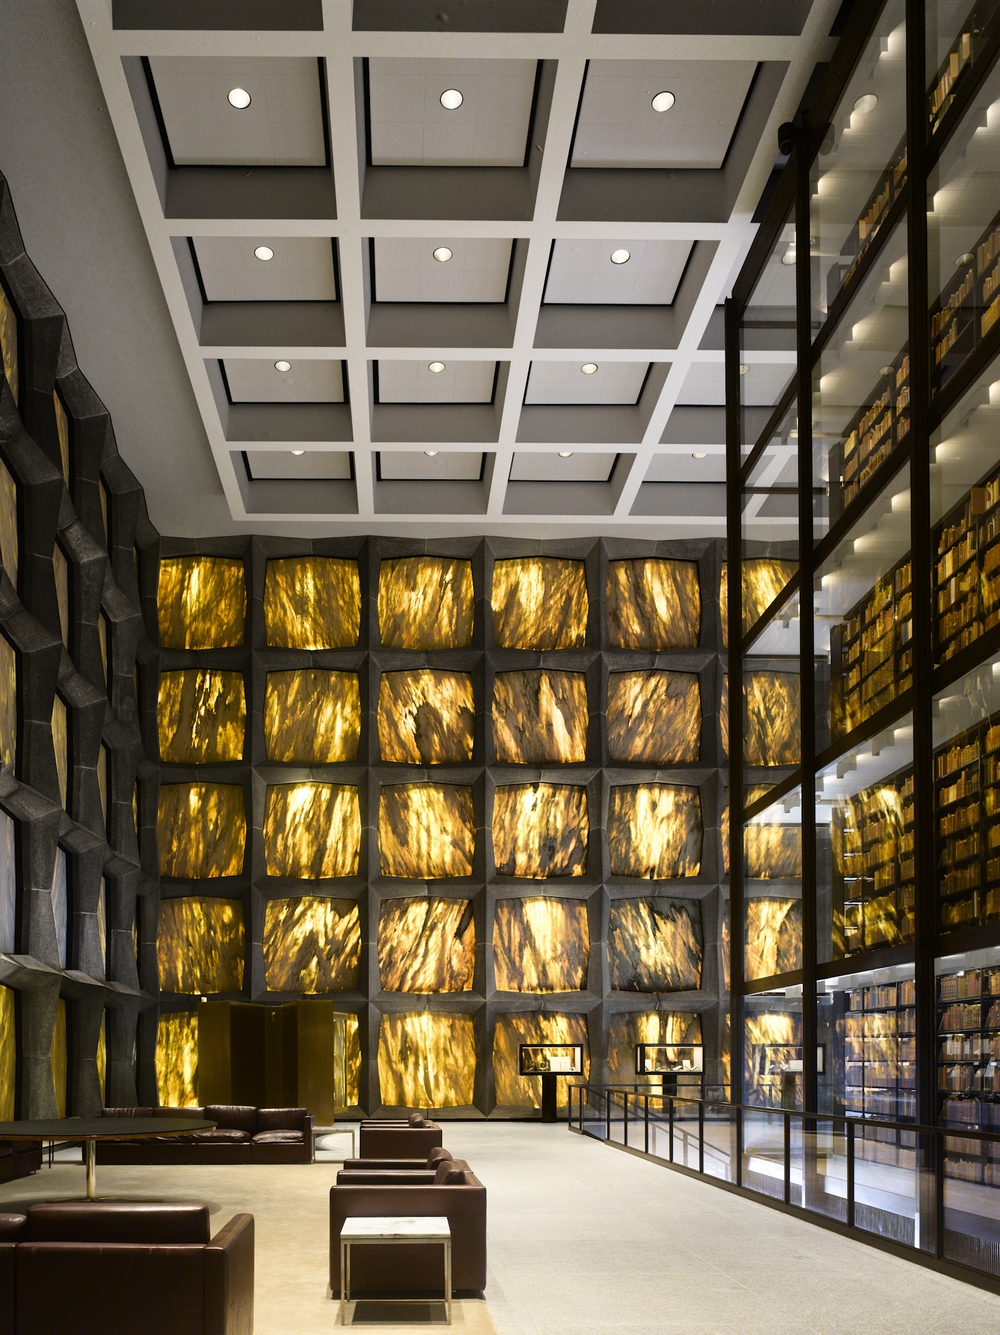 Beinecke Rare Book and Manuscript Library; New Haven, Conn., USA